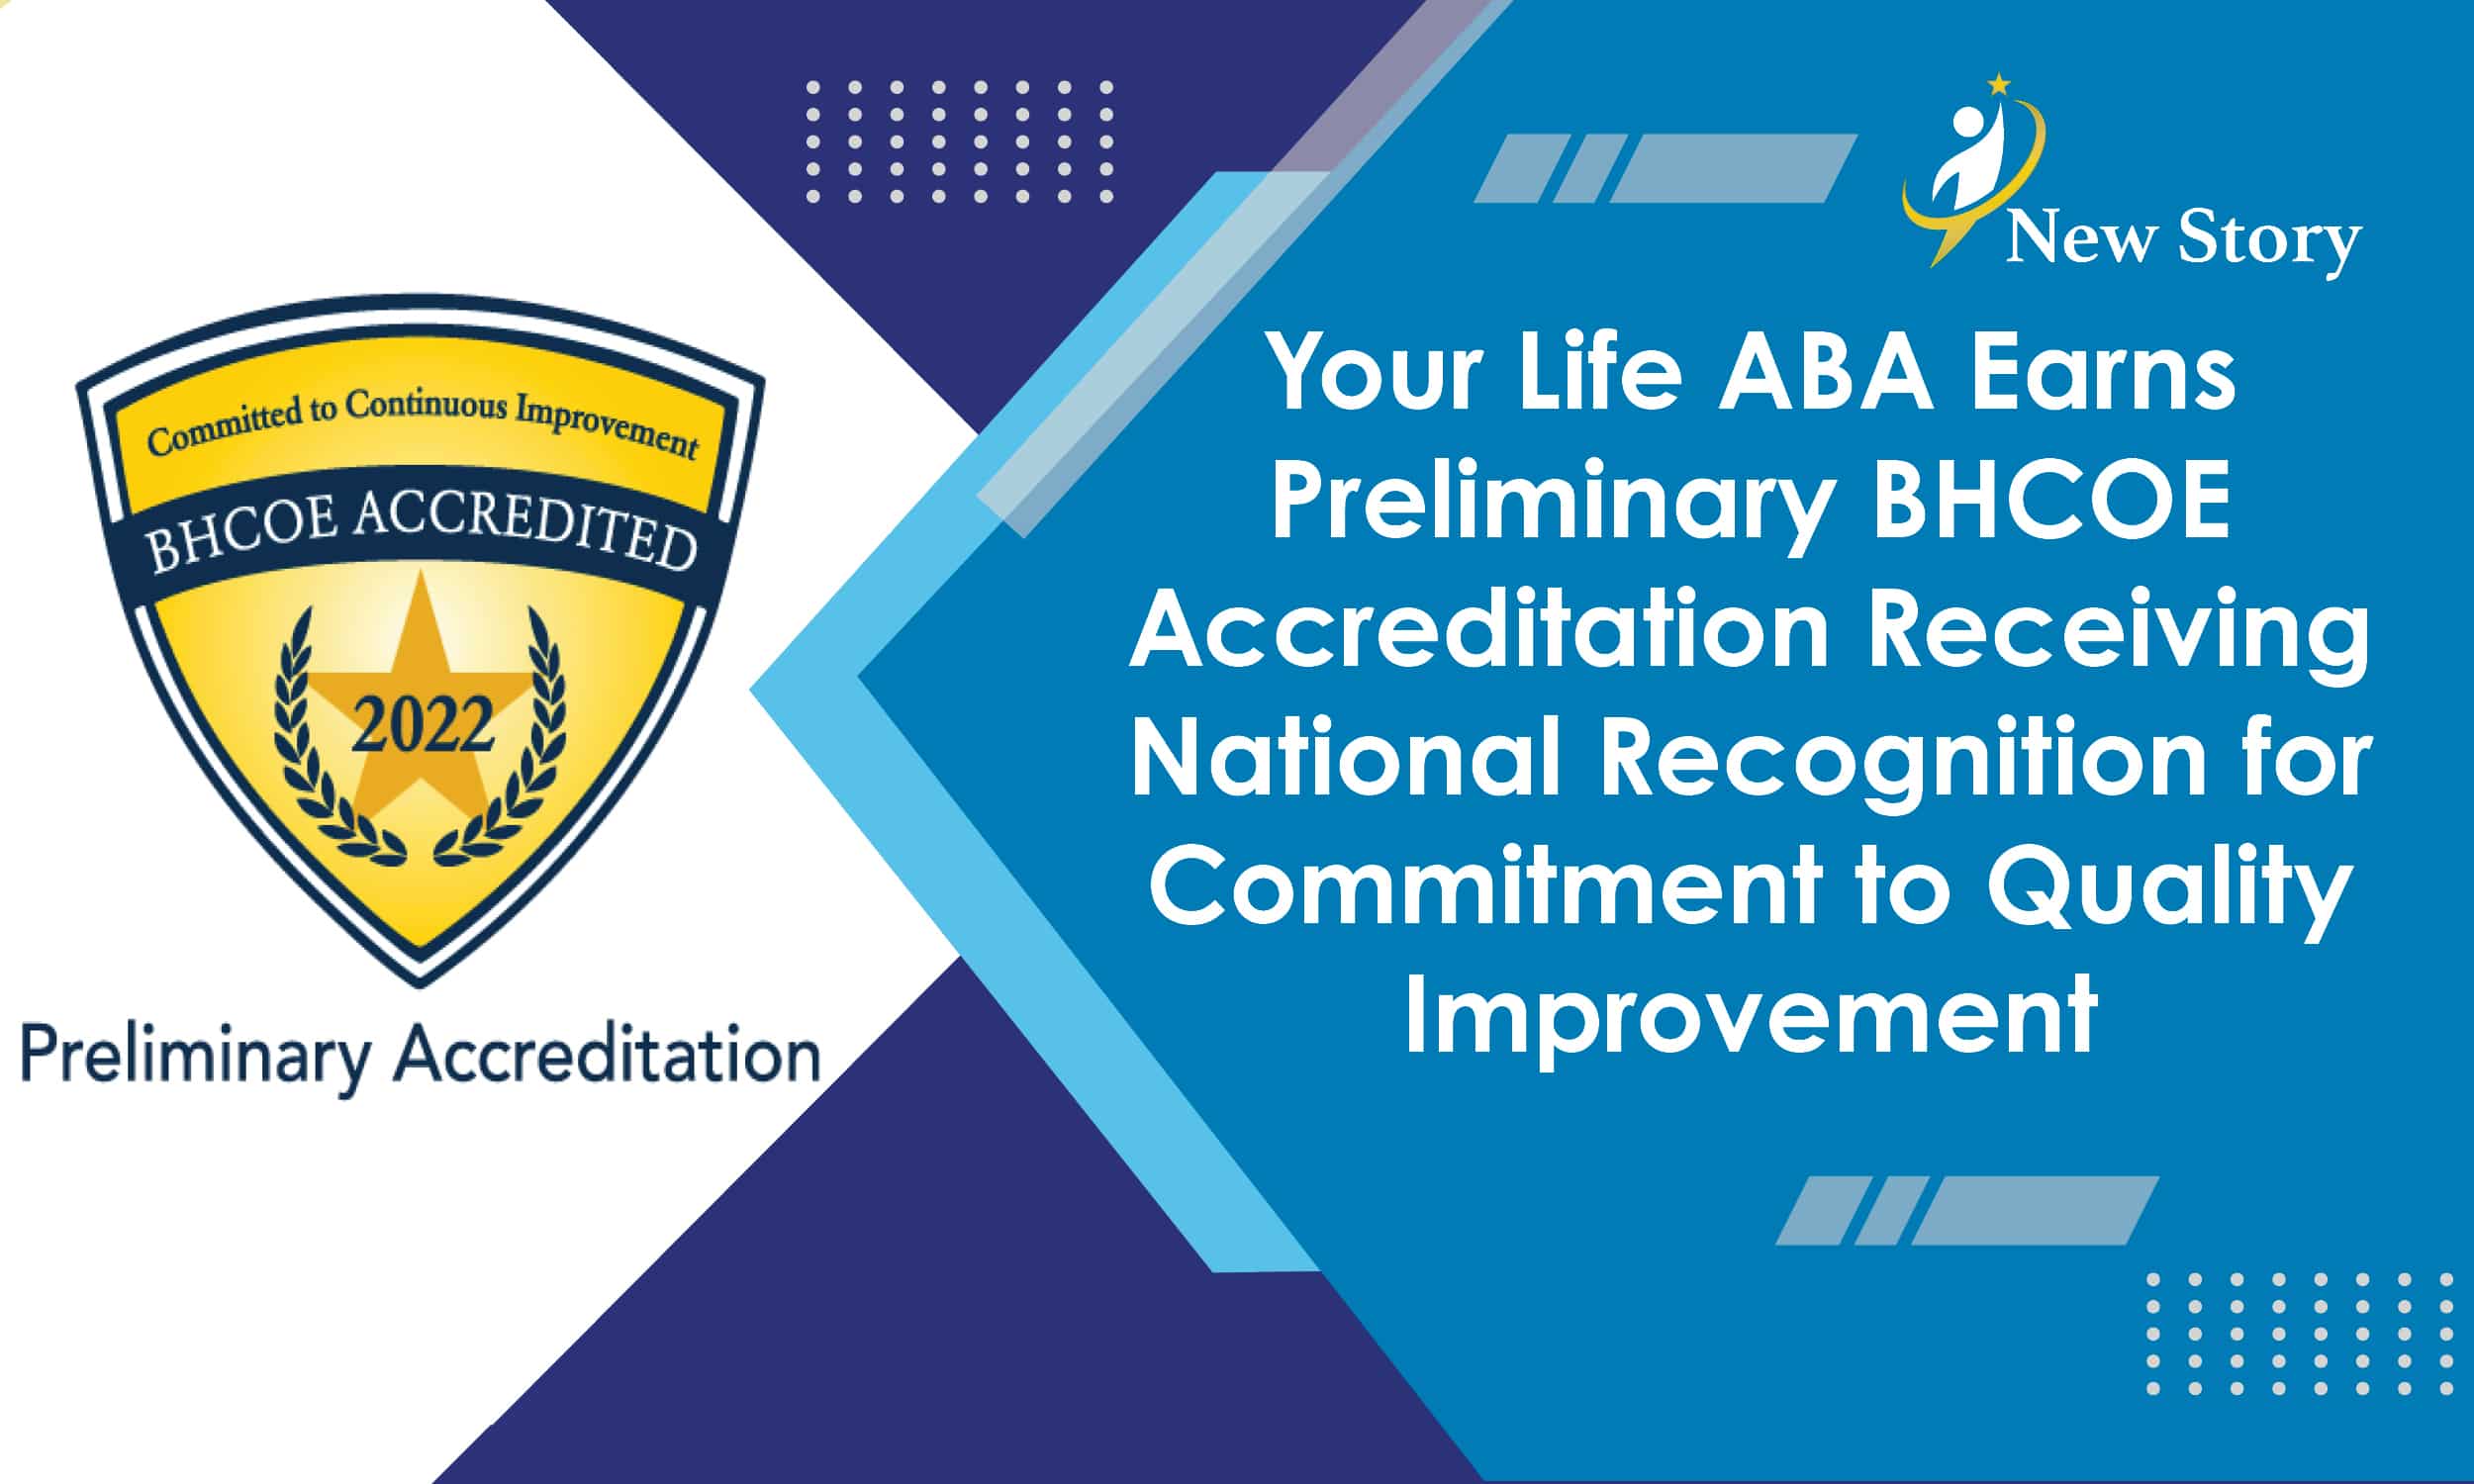 Your Life ABA Earns Preliminary BHCOE Accreditation Receiving National Recognition For Commitment to Quality Improvement